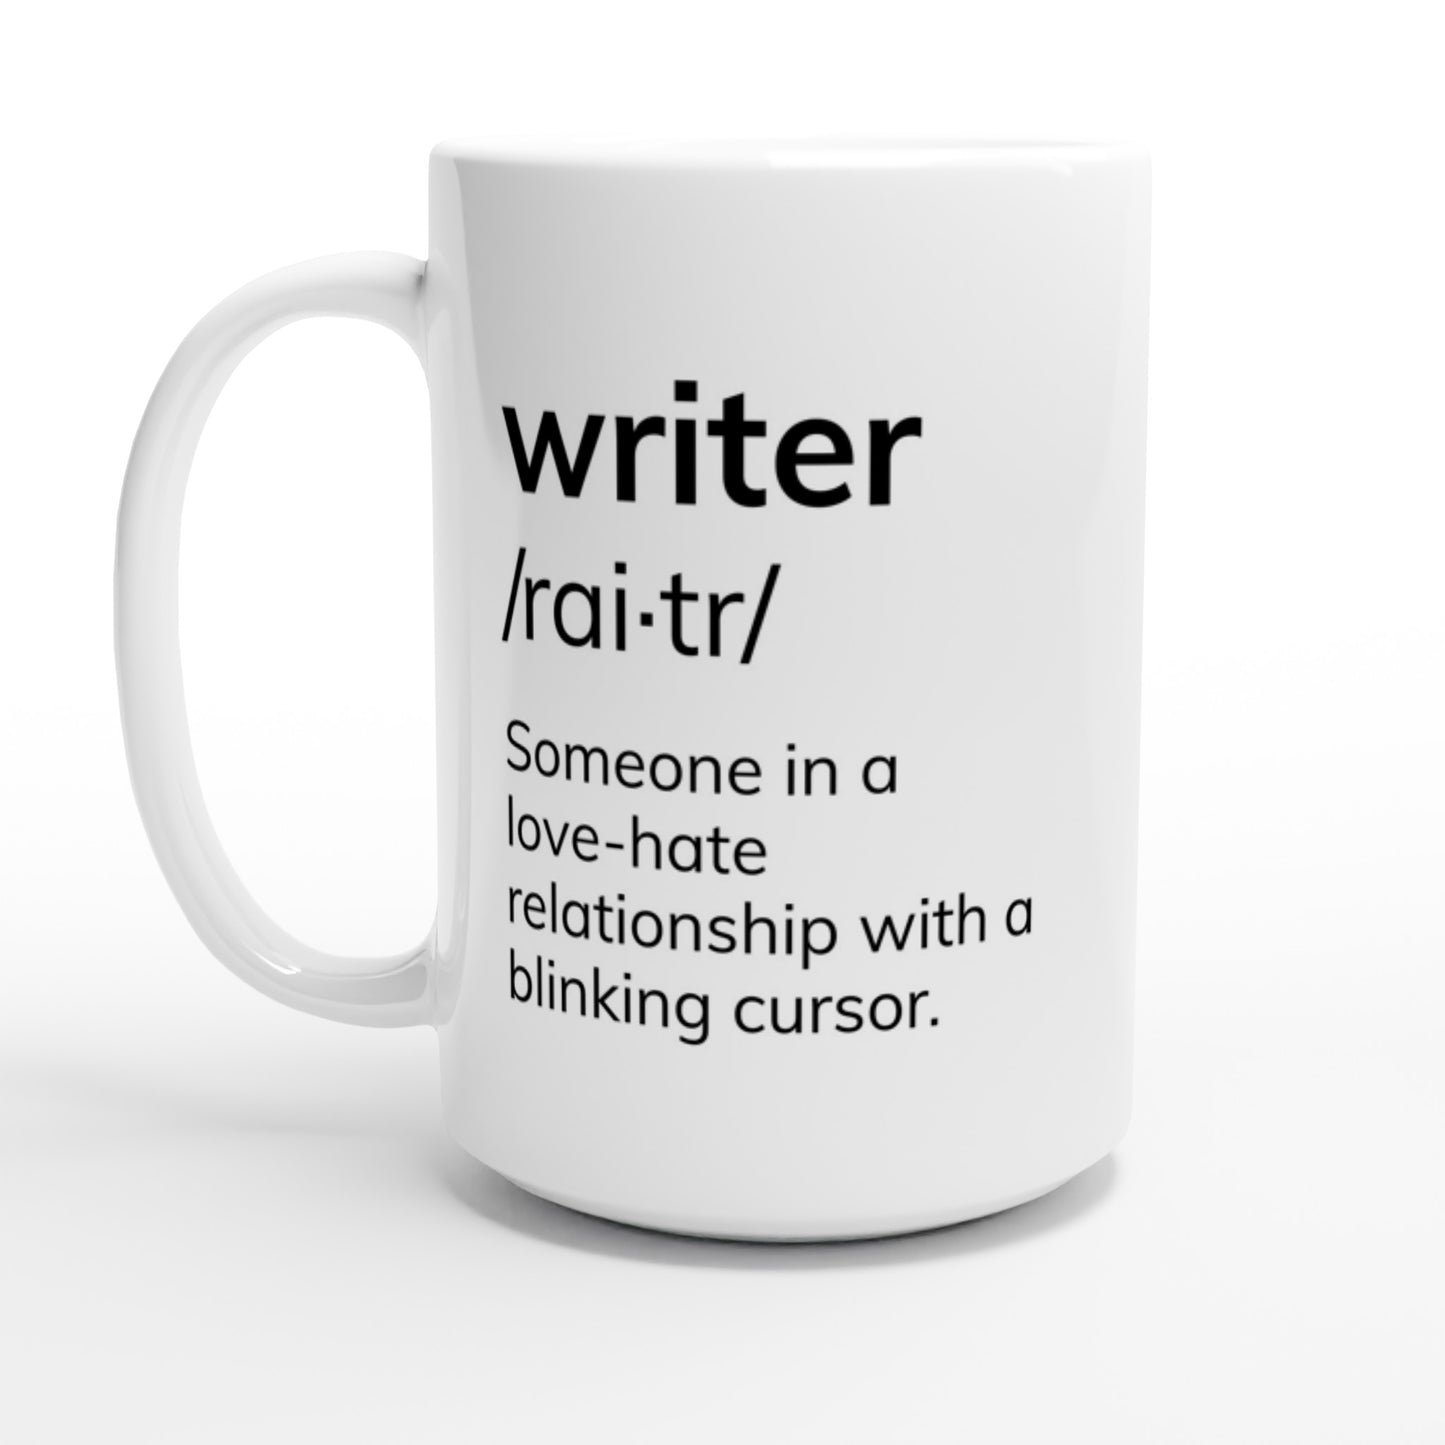 A white mug with the words "Writer: Someone in a love-hate relationship with a blinking cursor" and a blinking cursor.